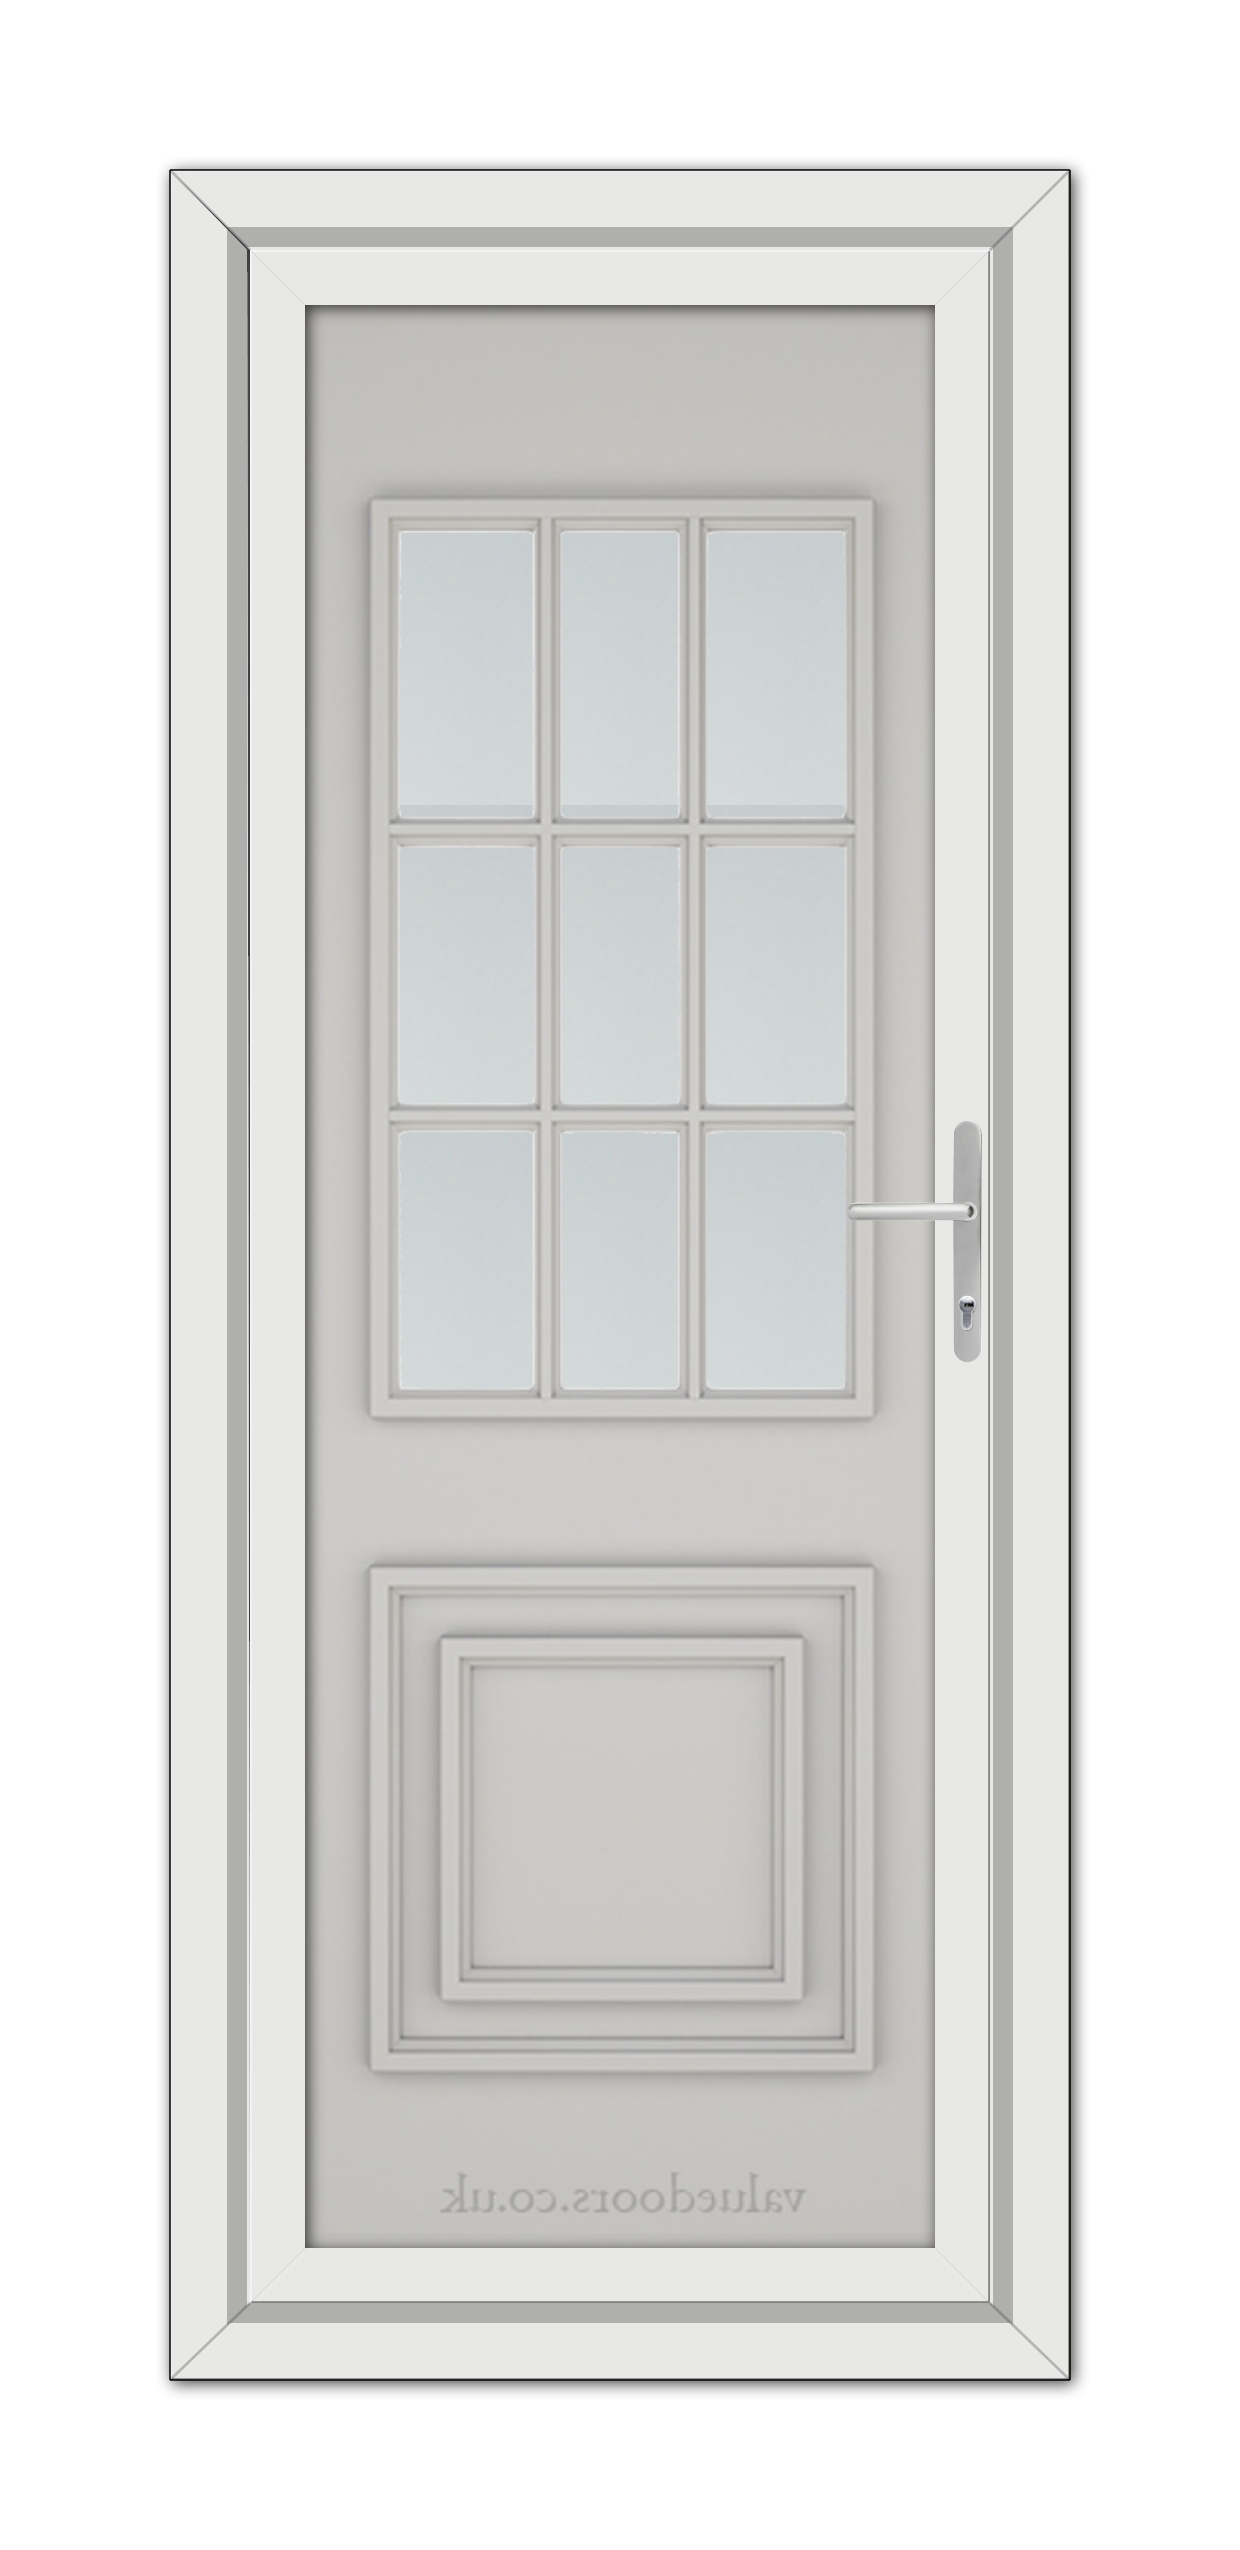 A vertical image of a closed, modern Silver Grey Cambridge One uPVC Door with a window featuring six glass panes and a metal handle.